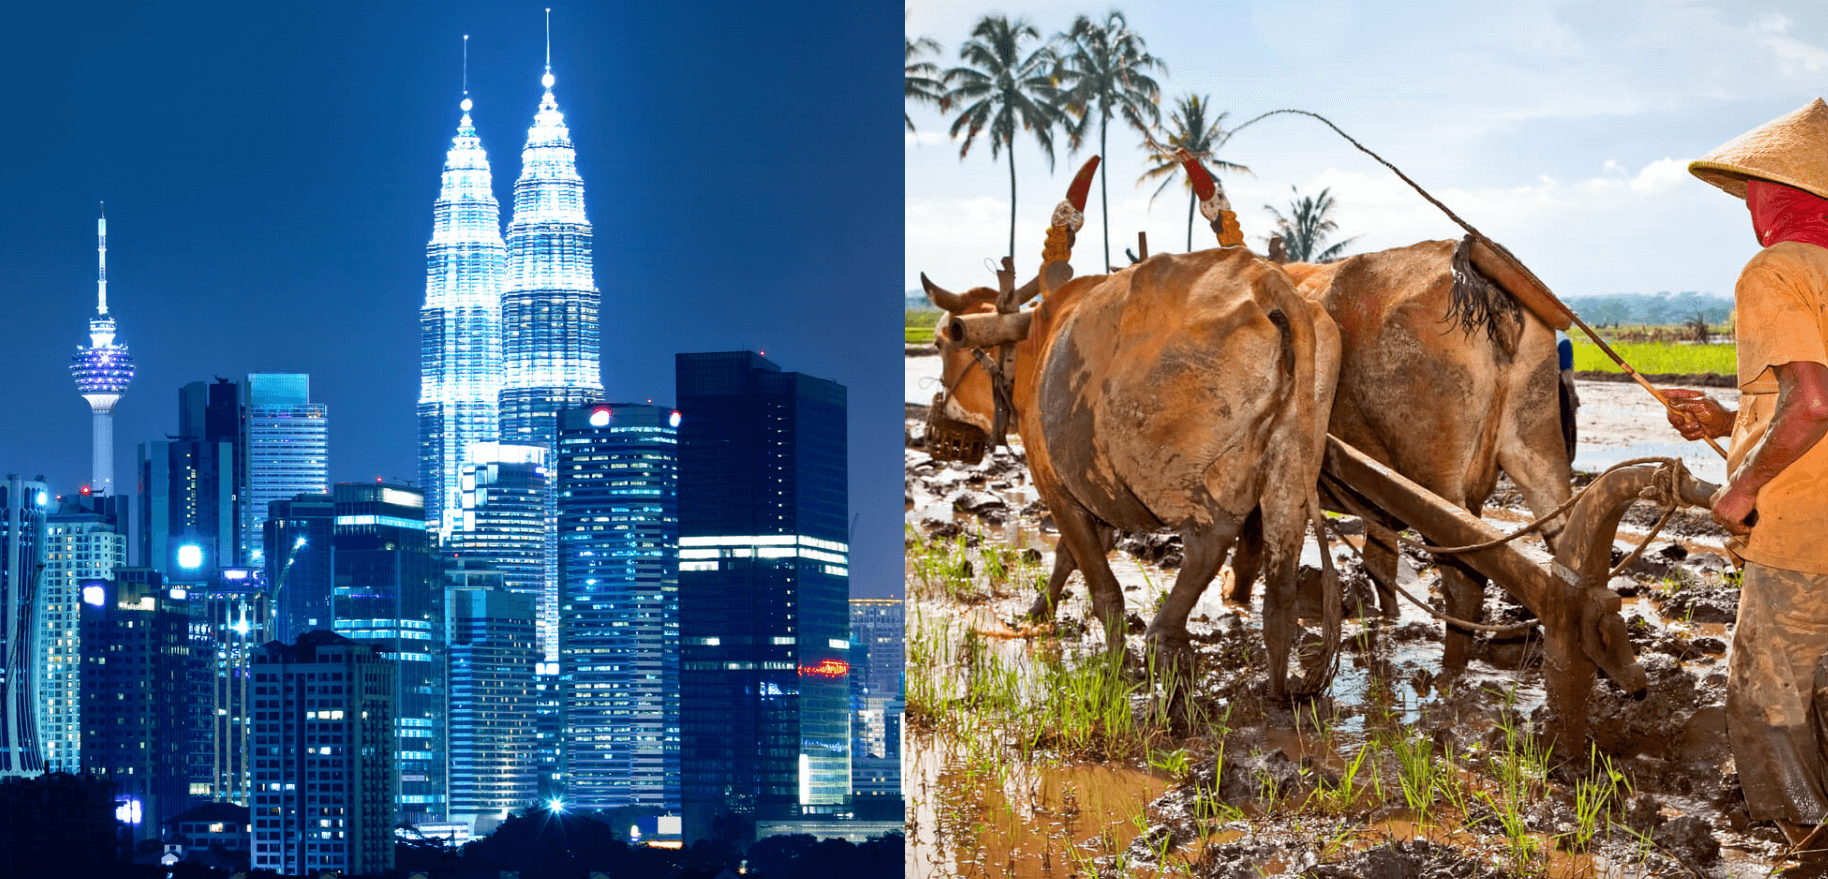 Flight deals from Oslo, Norway to both Kuala Lumpur, Malaysia and Jakarta, Indonesia | Secret Flying